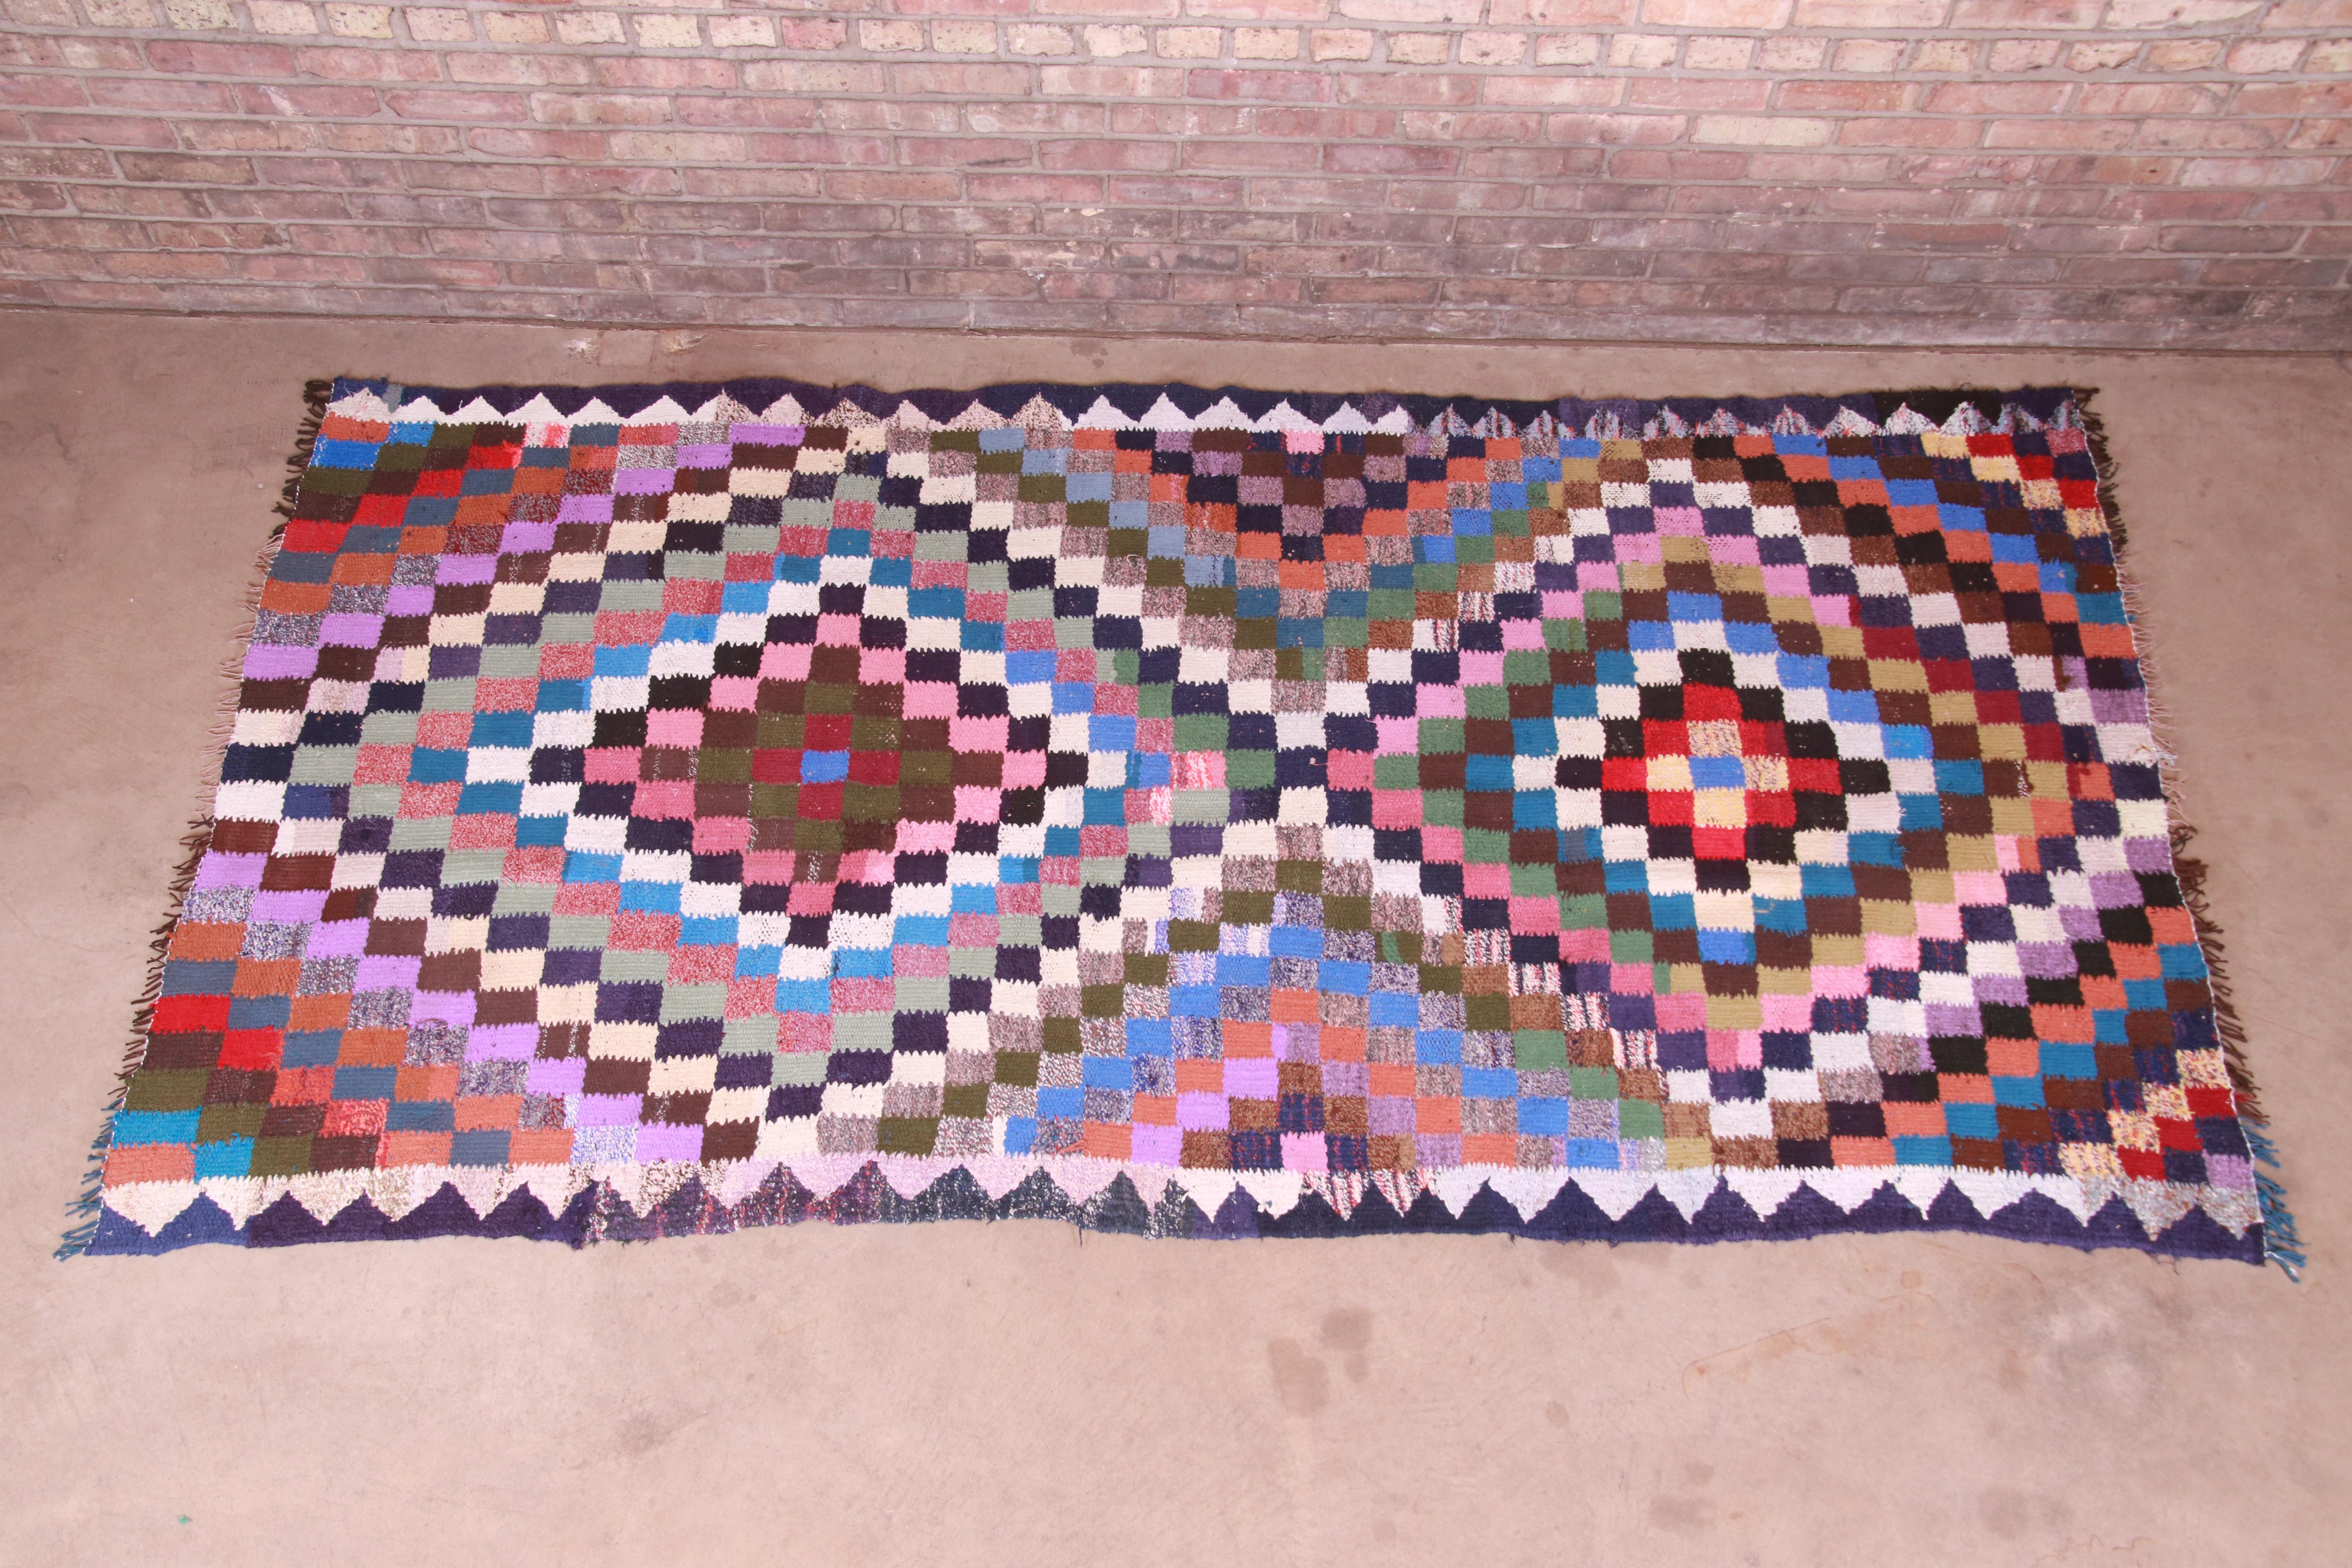 Mid-Century Modern Vintage Handwoven Persian Kilim Rug with Vibrant Colors